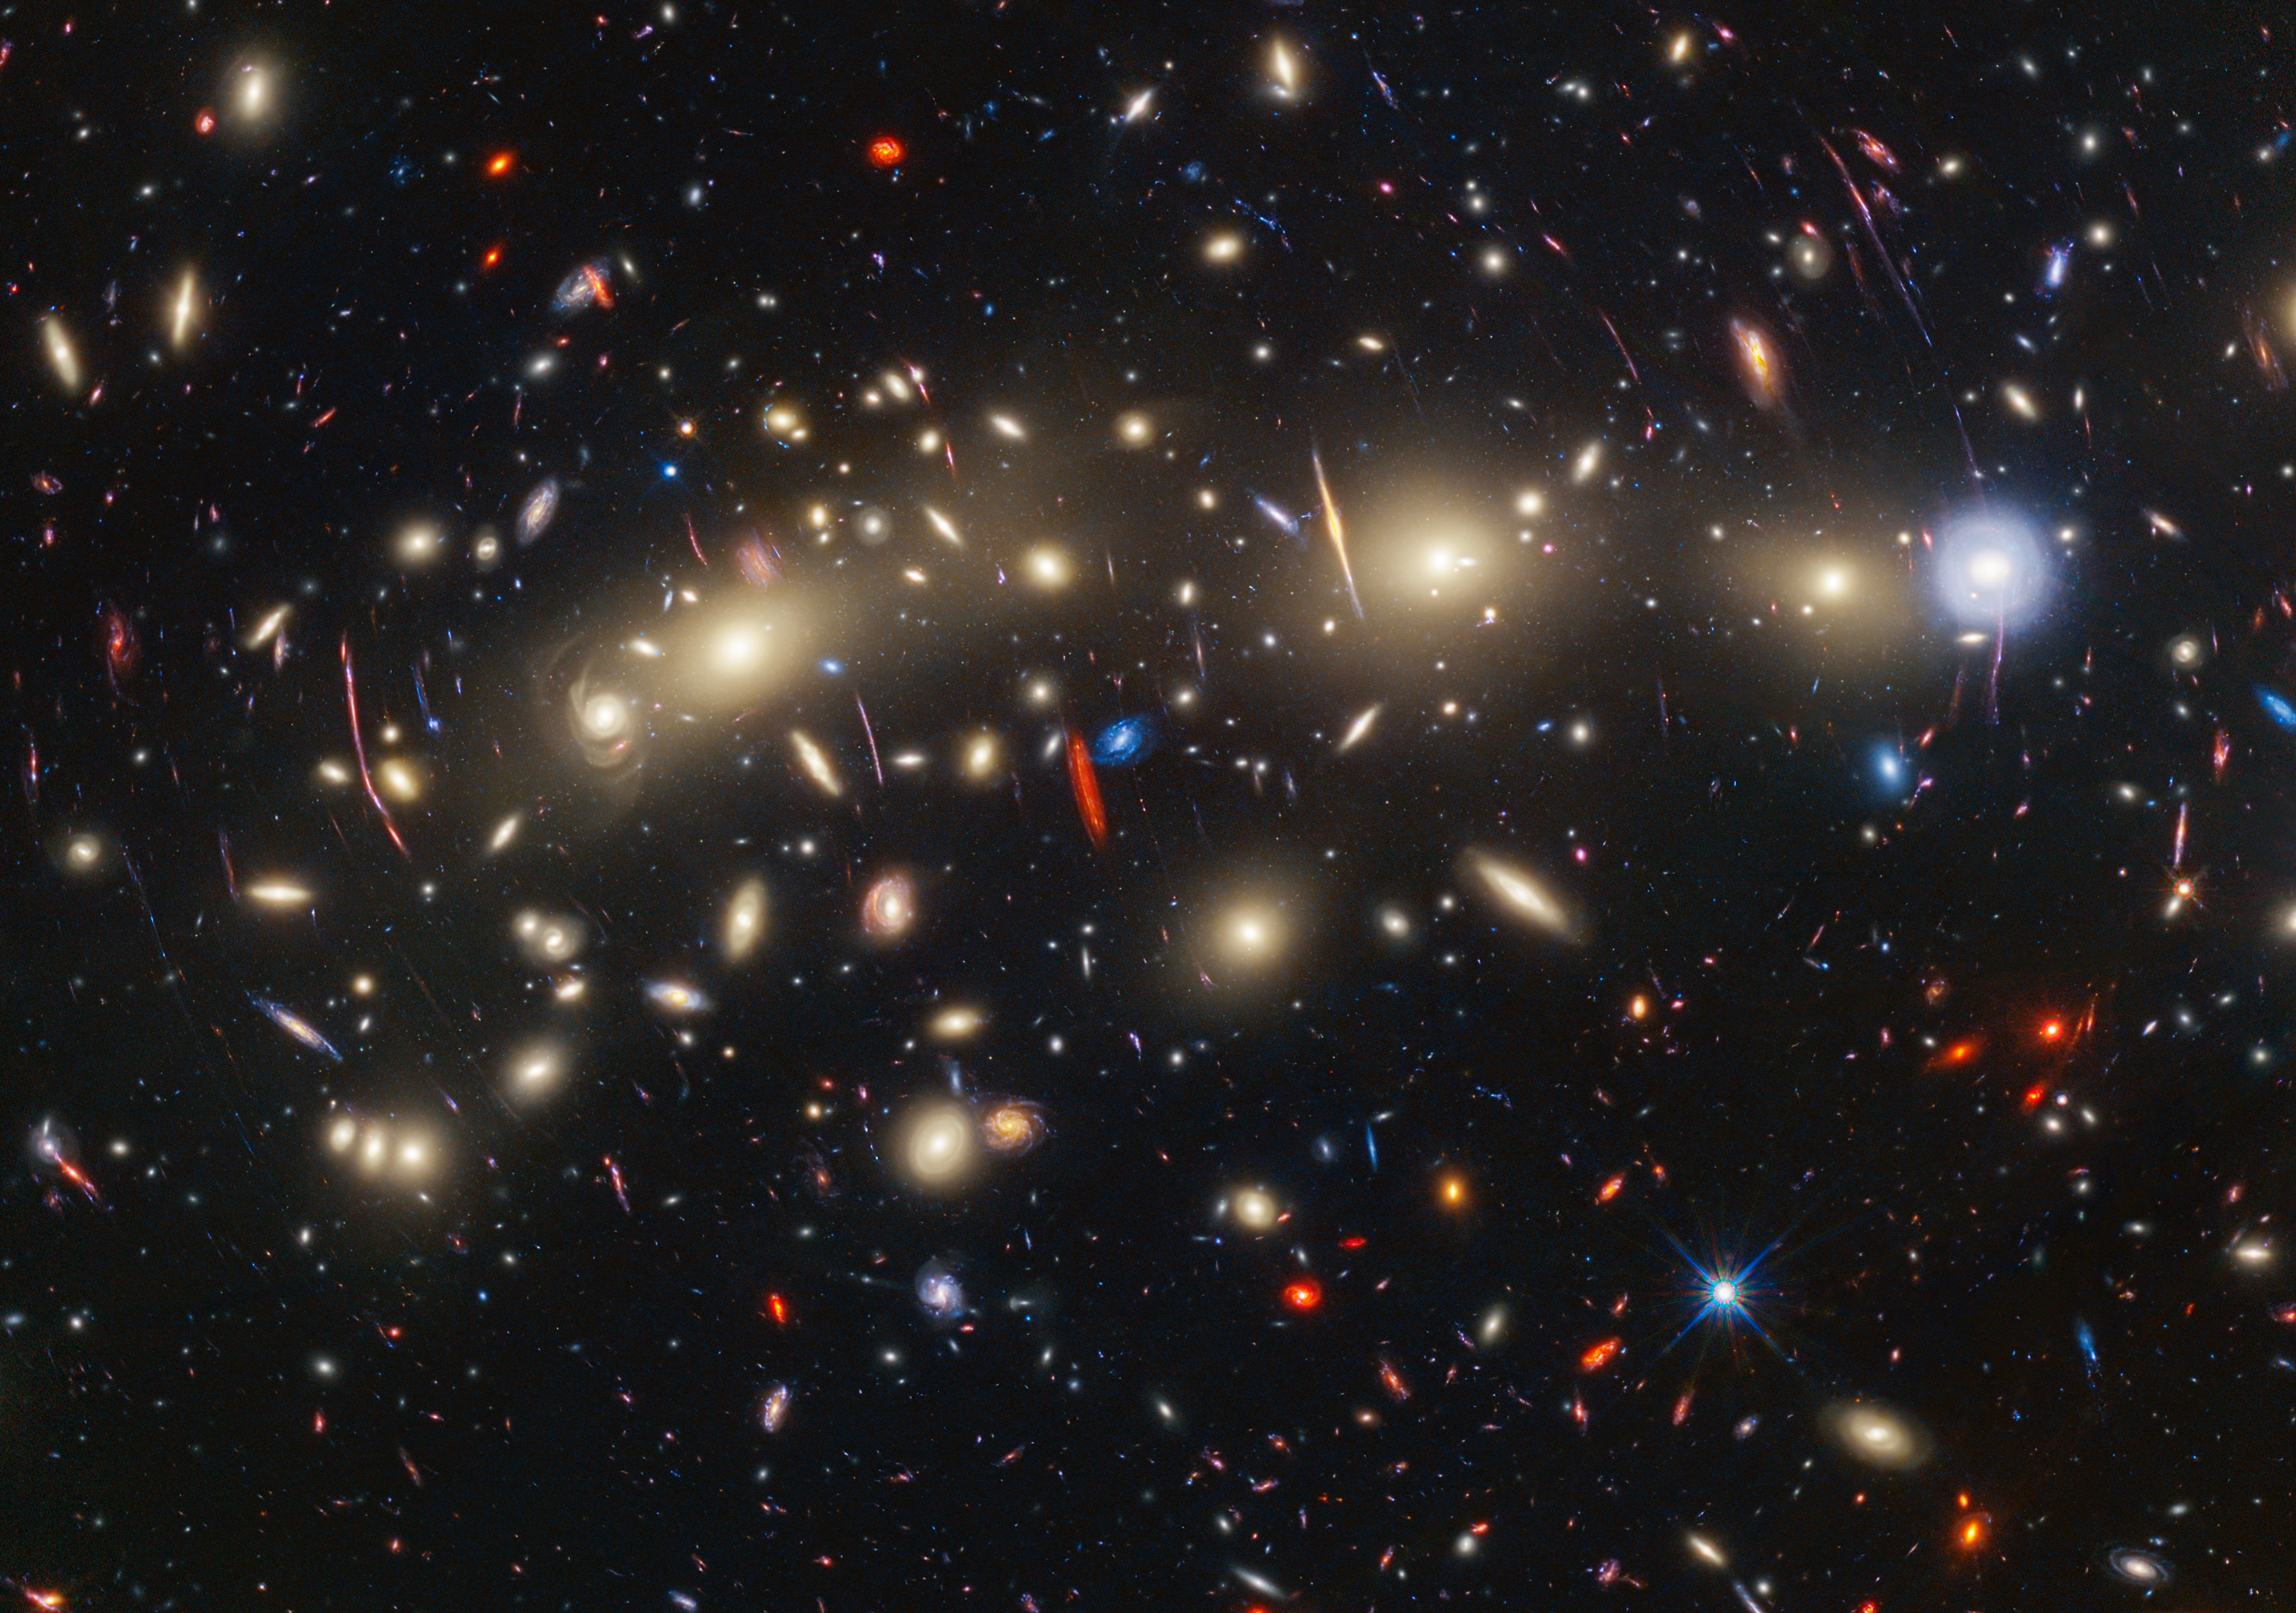 This panchromatic view of galaxy cluster MACS0416 was created by combining infrared observations from NASA’s James Webb Space Telescope with visible-light data from NASA’s Hubble Space Telescope